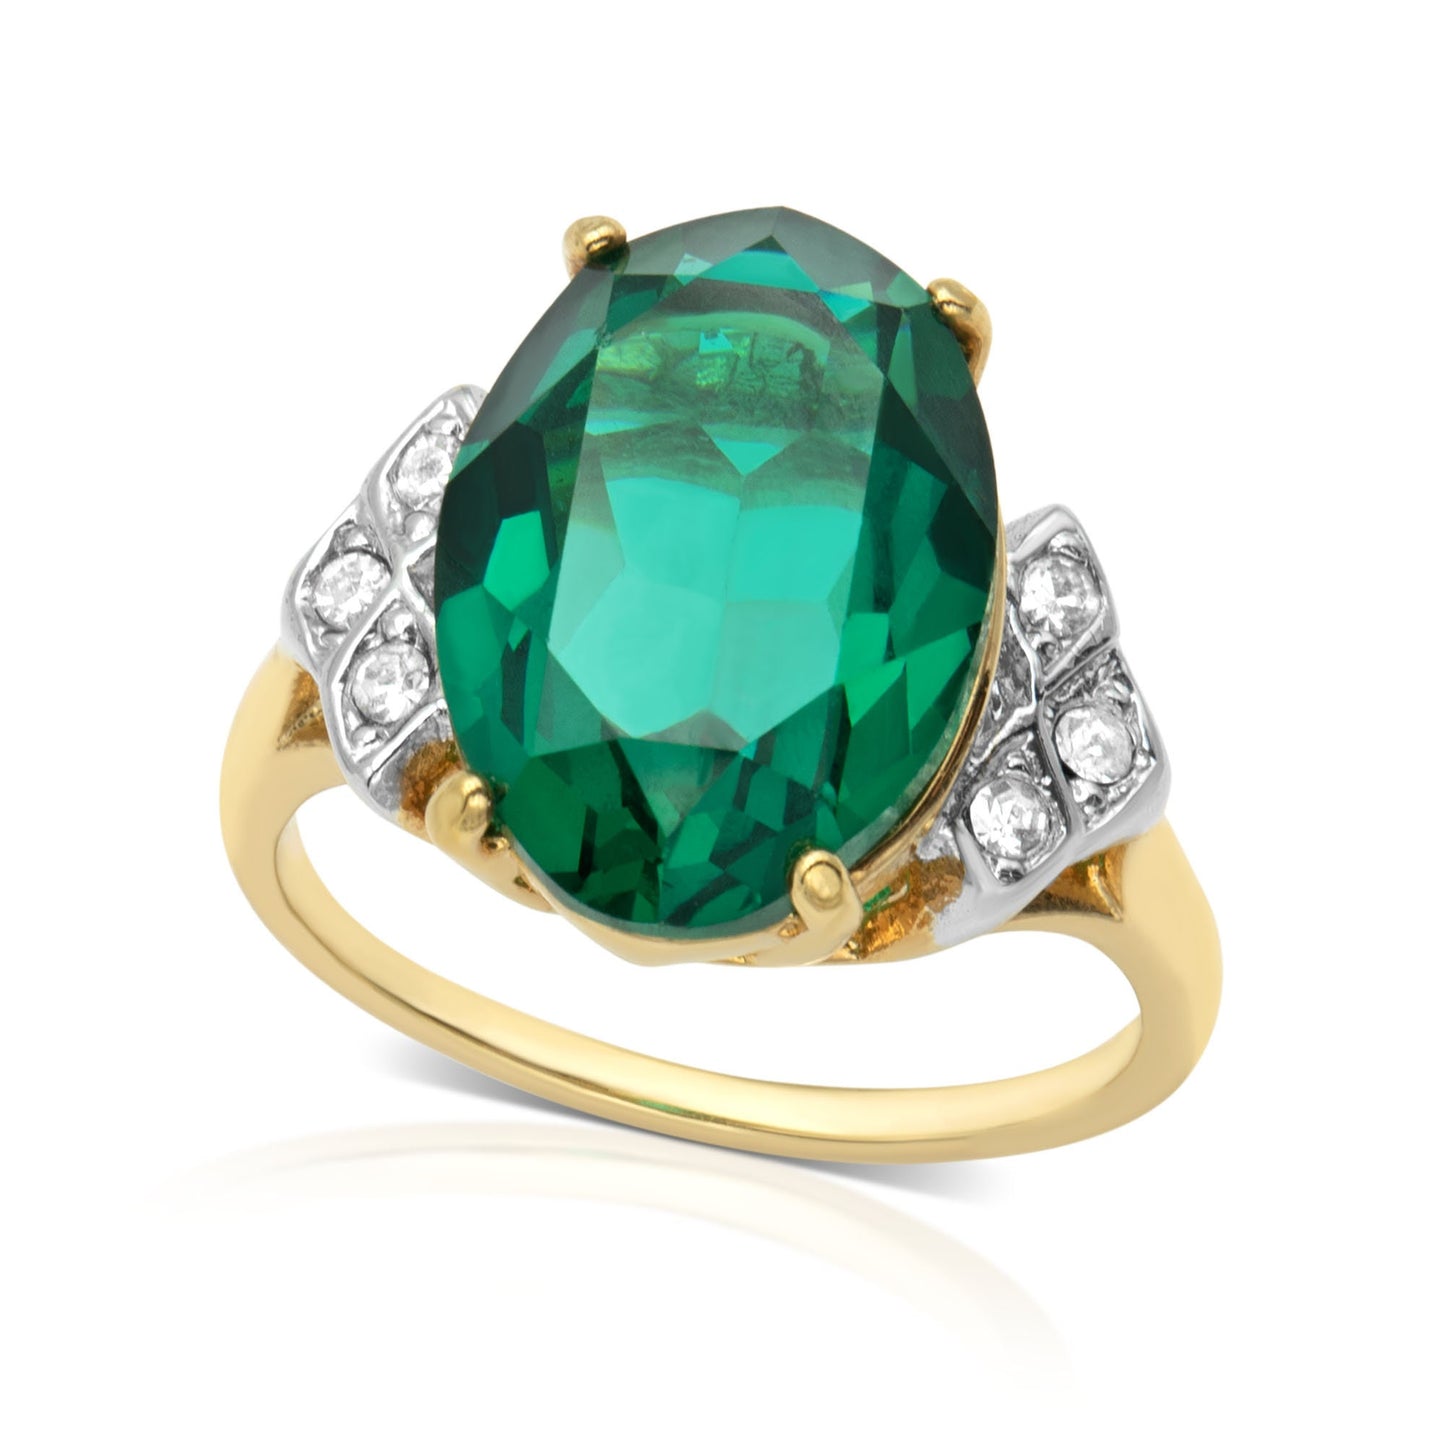 Vintage 1970s Emerald Green Austrian Crystal Ring with Clear Crystals May Birthstone Color #R1928 Size: 10